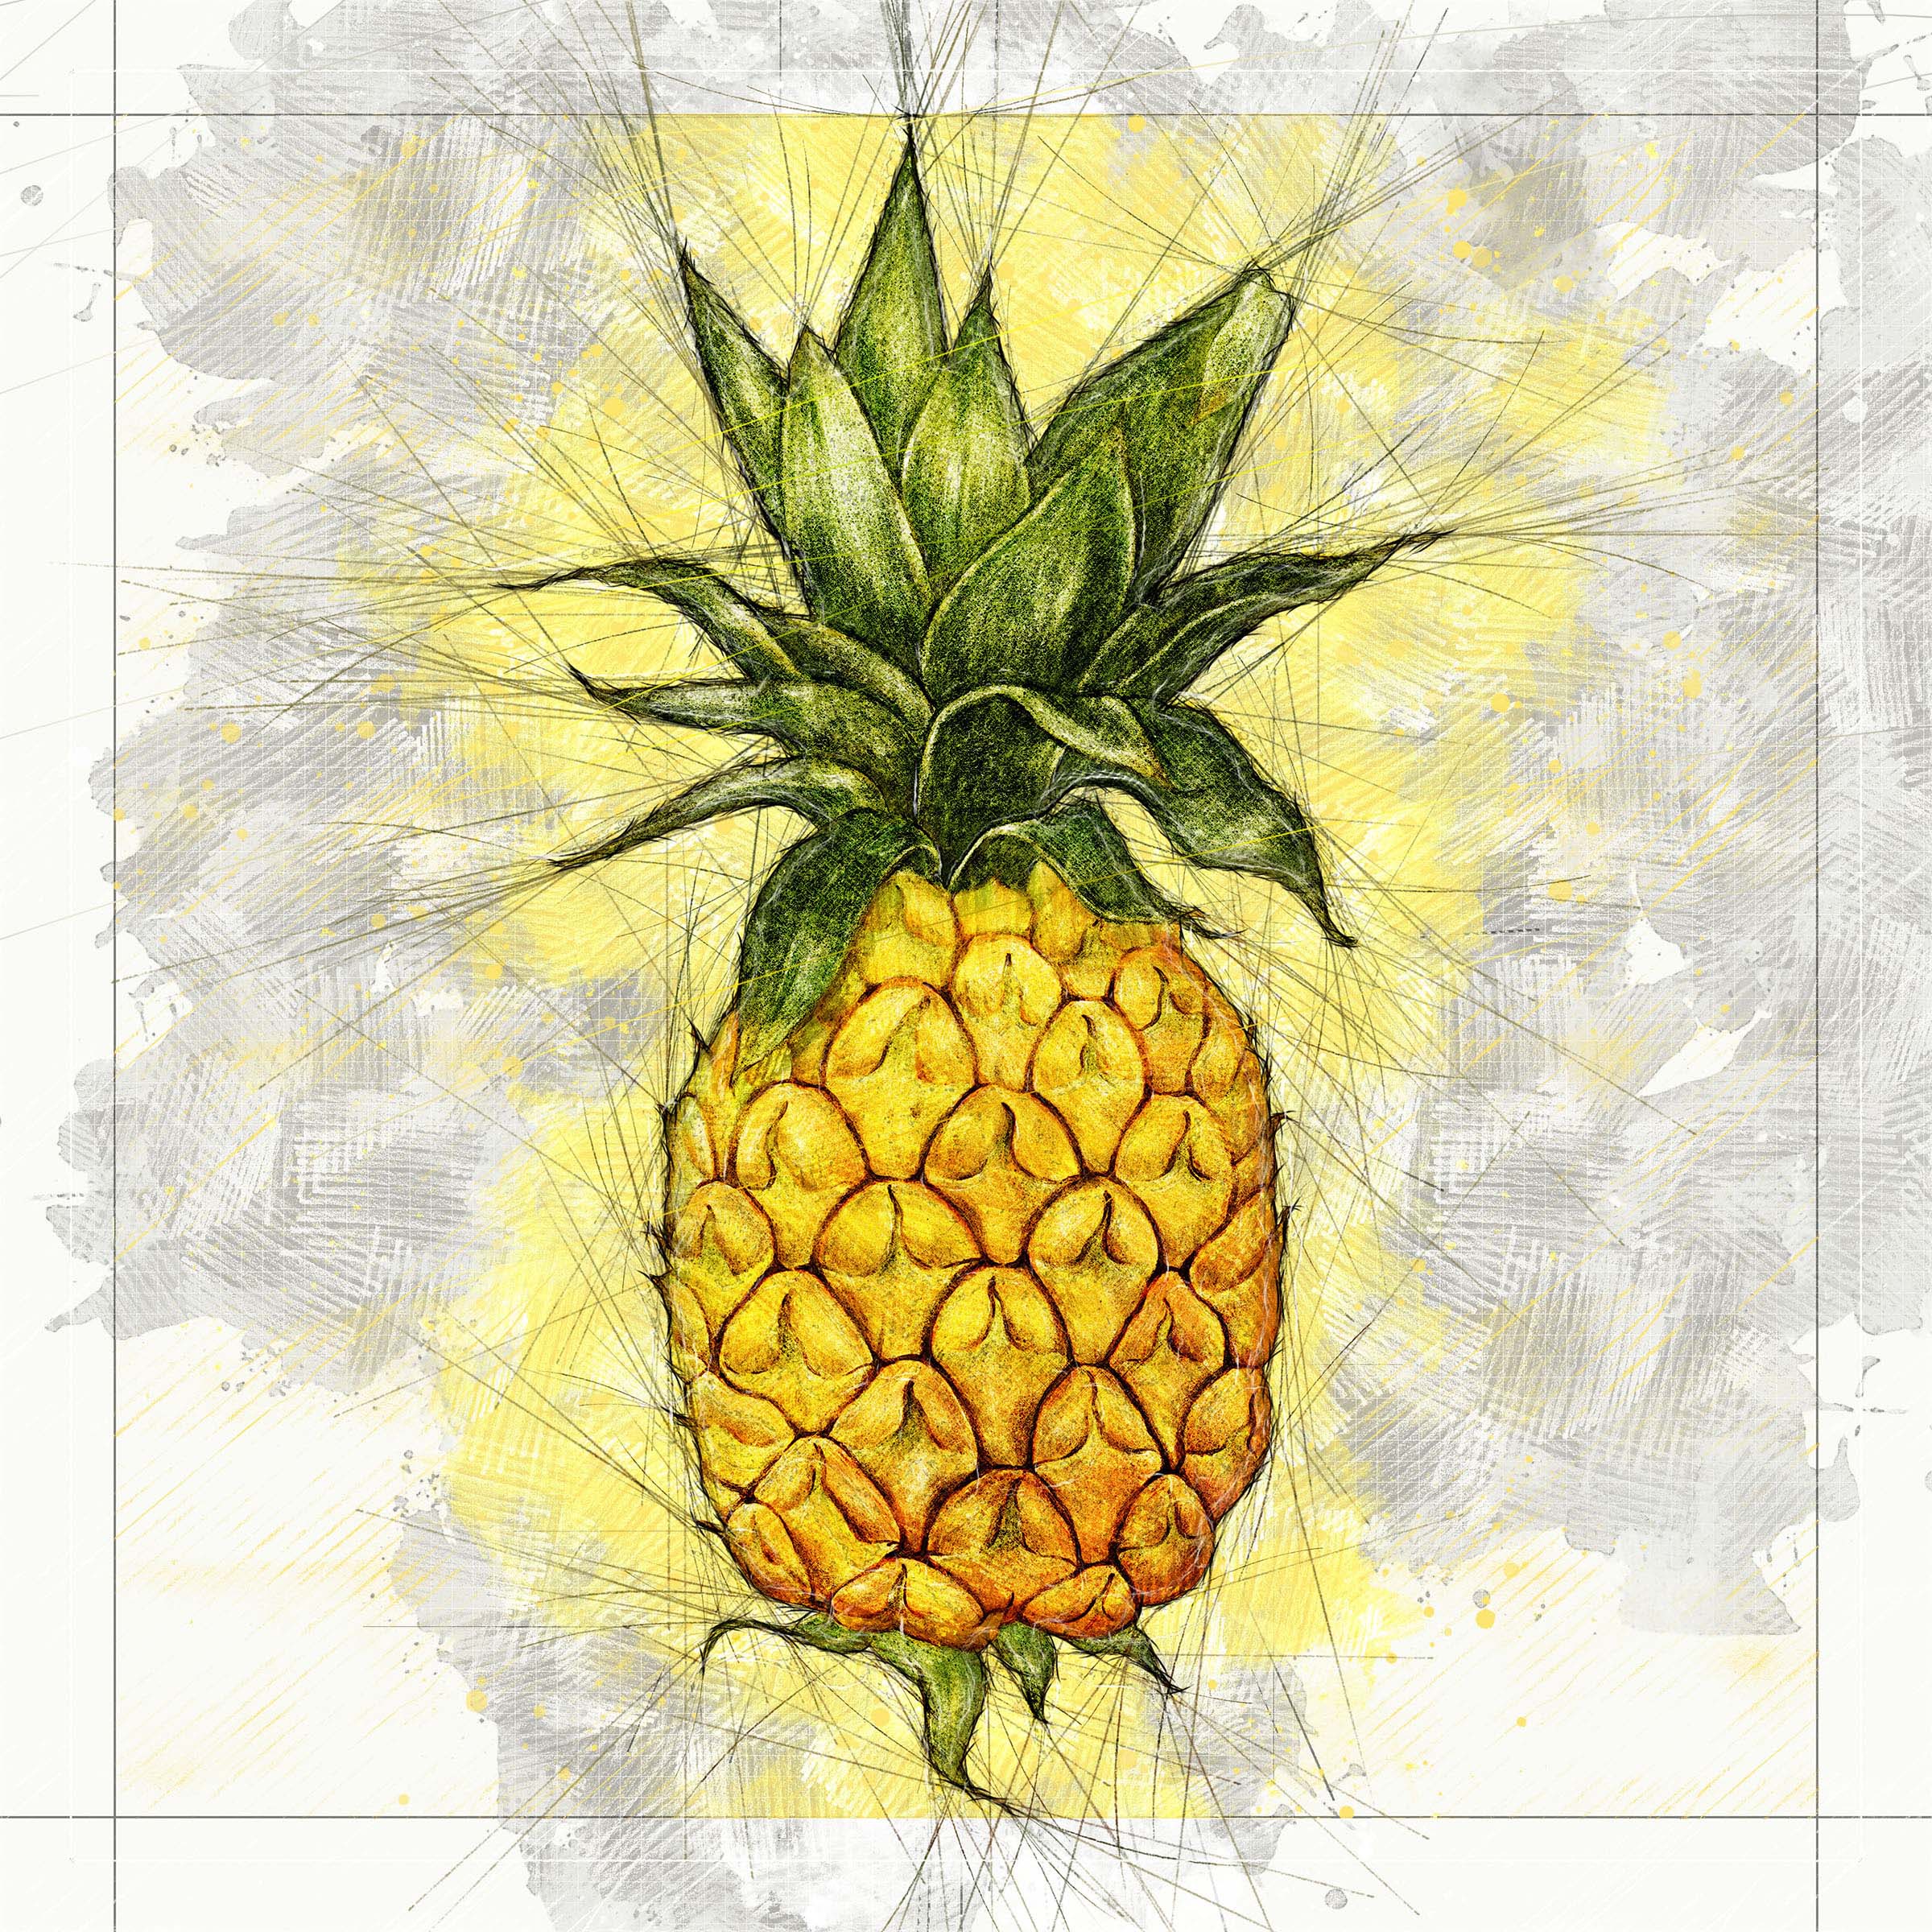 How To Draw A Pineapple Step By Step Pencil Sketch - YouTube